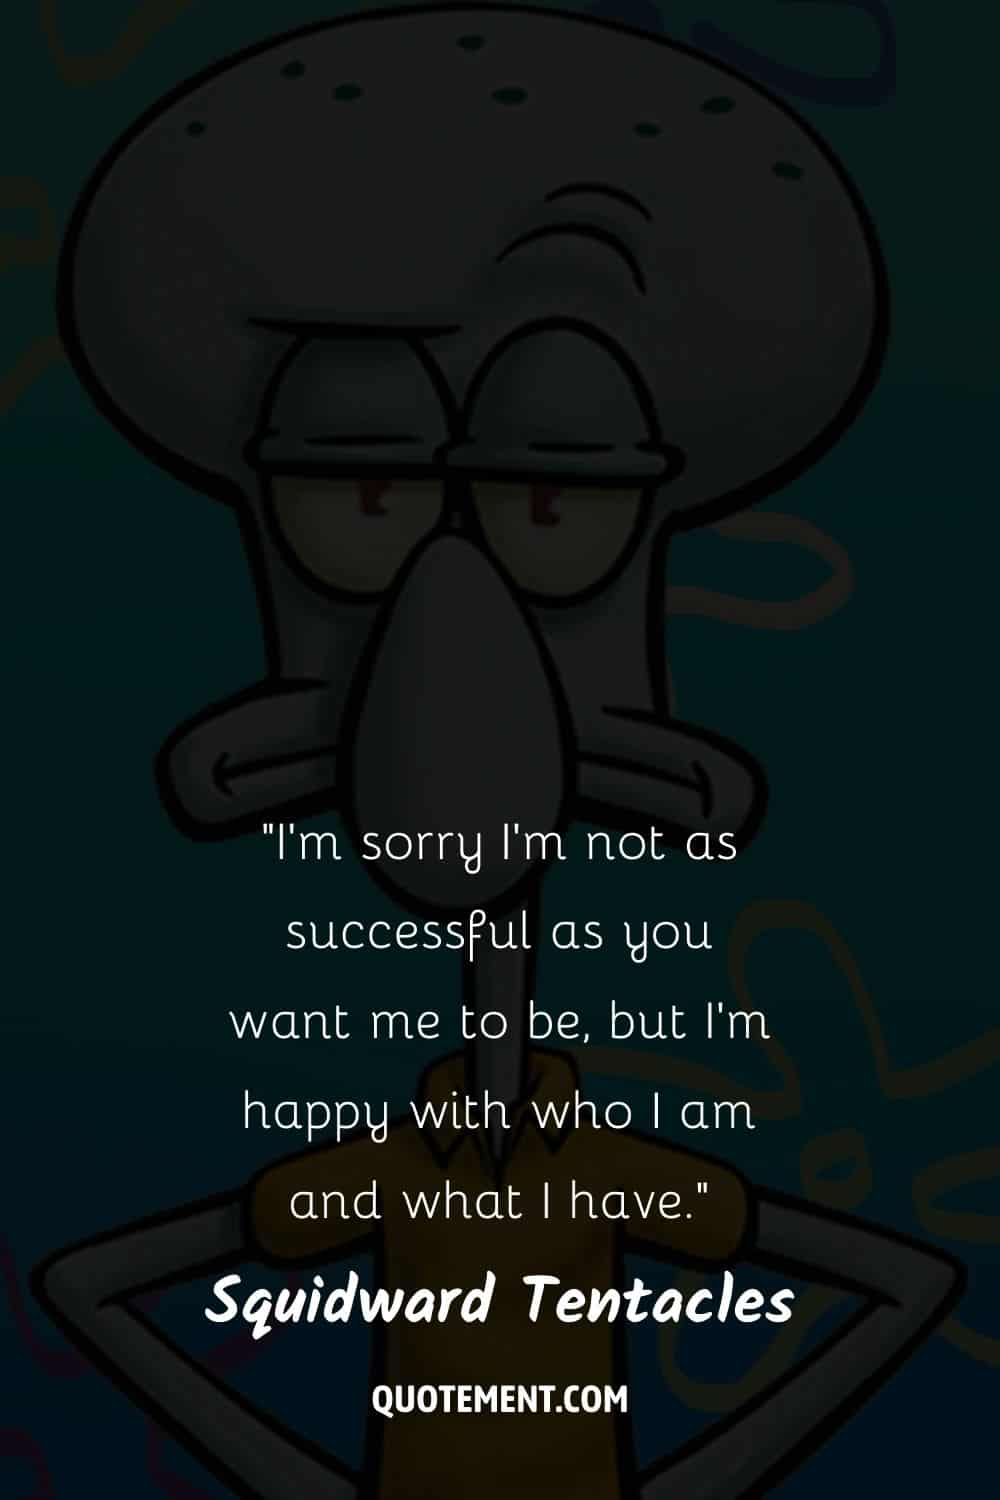 illustration of Squidward Tentacles representing the best Squidward quote